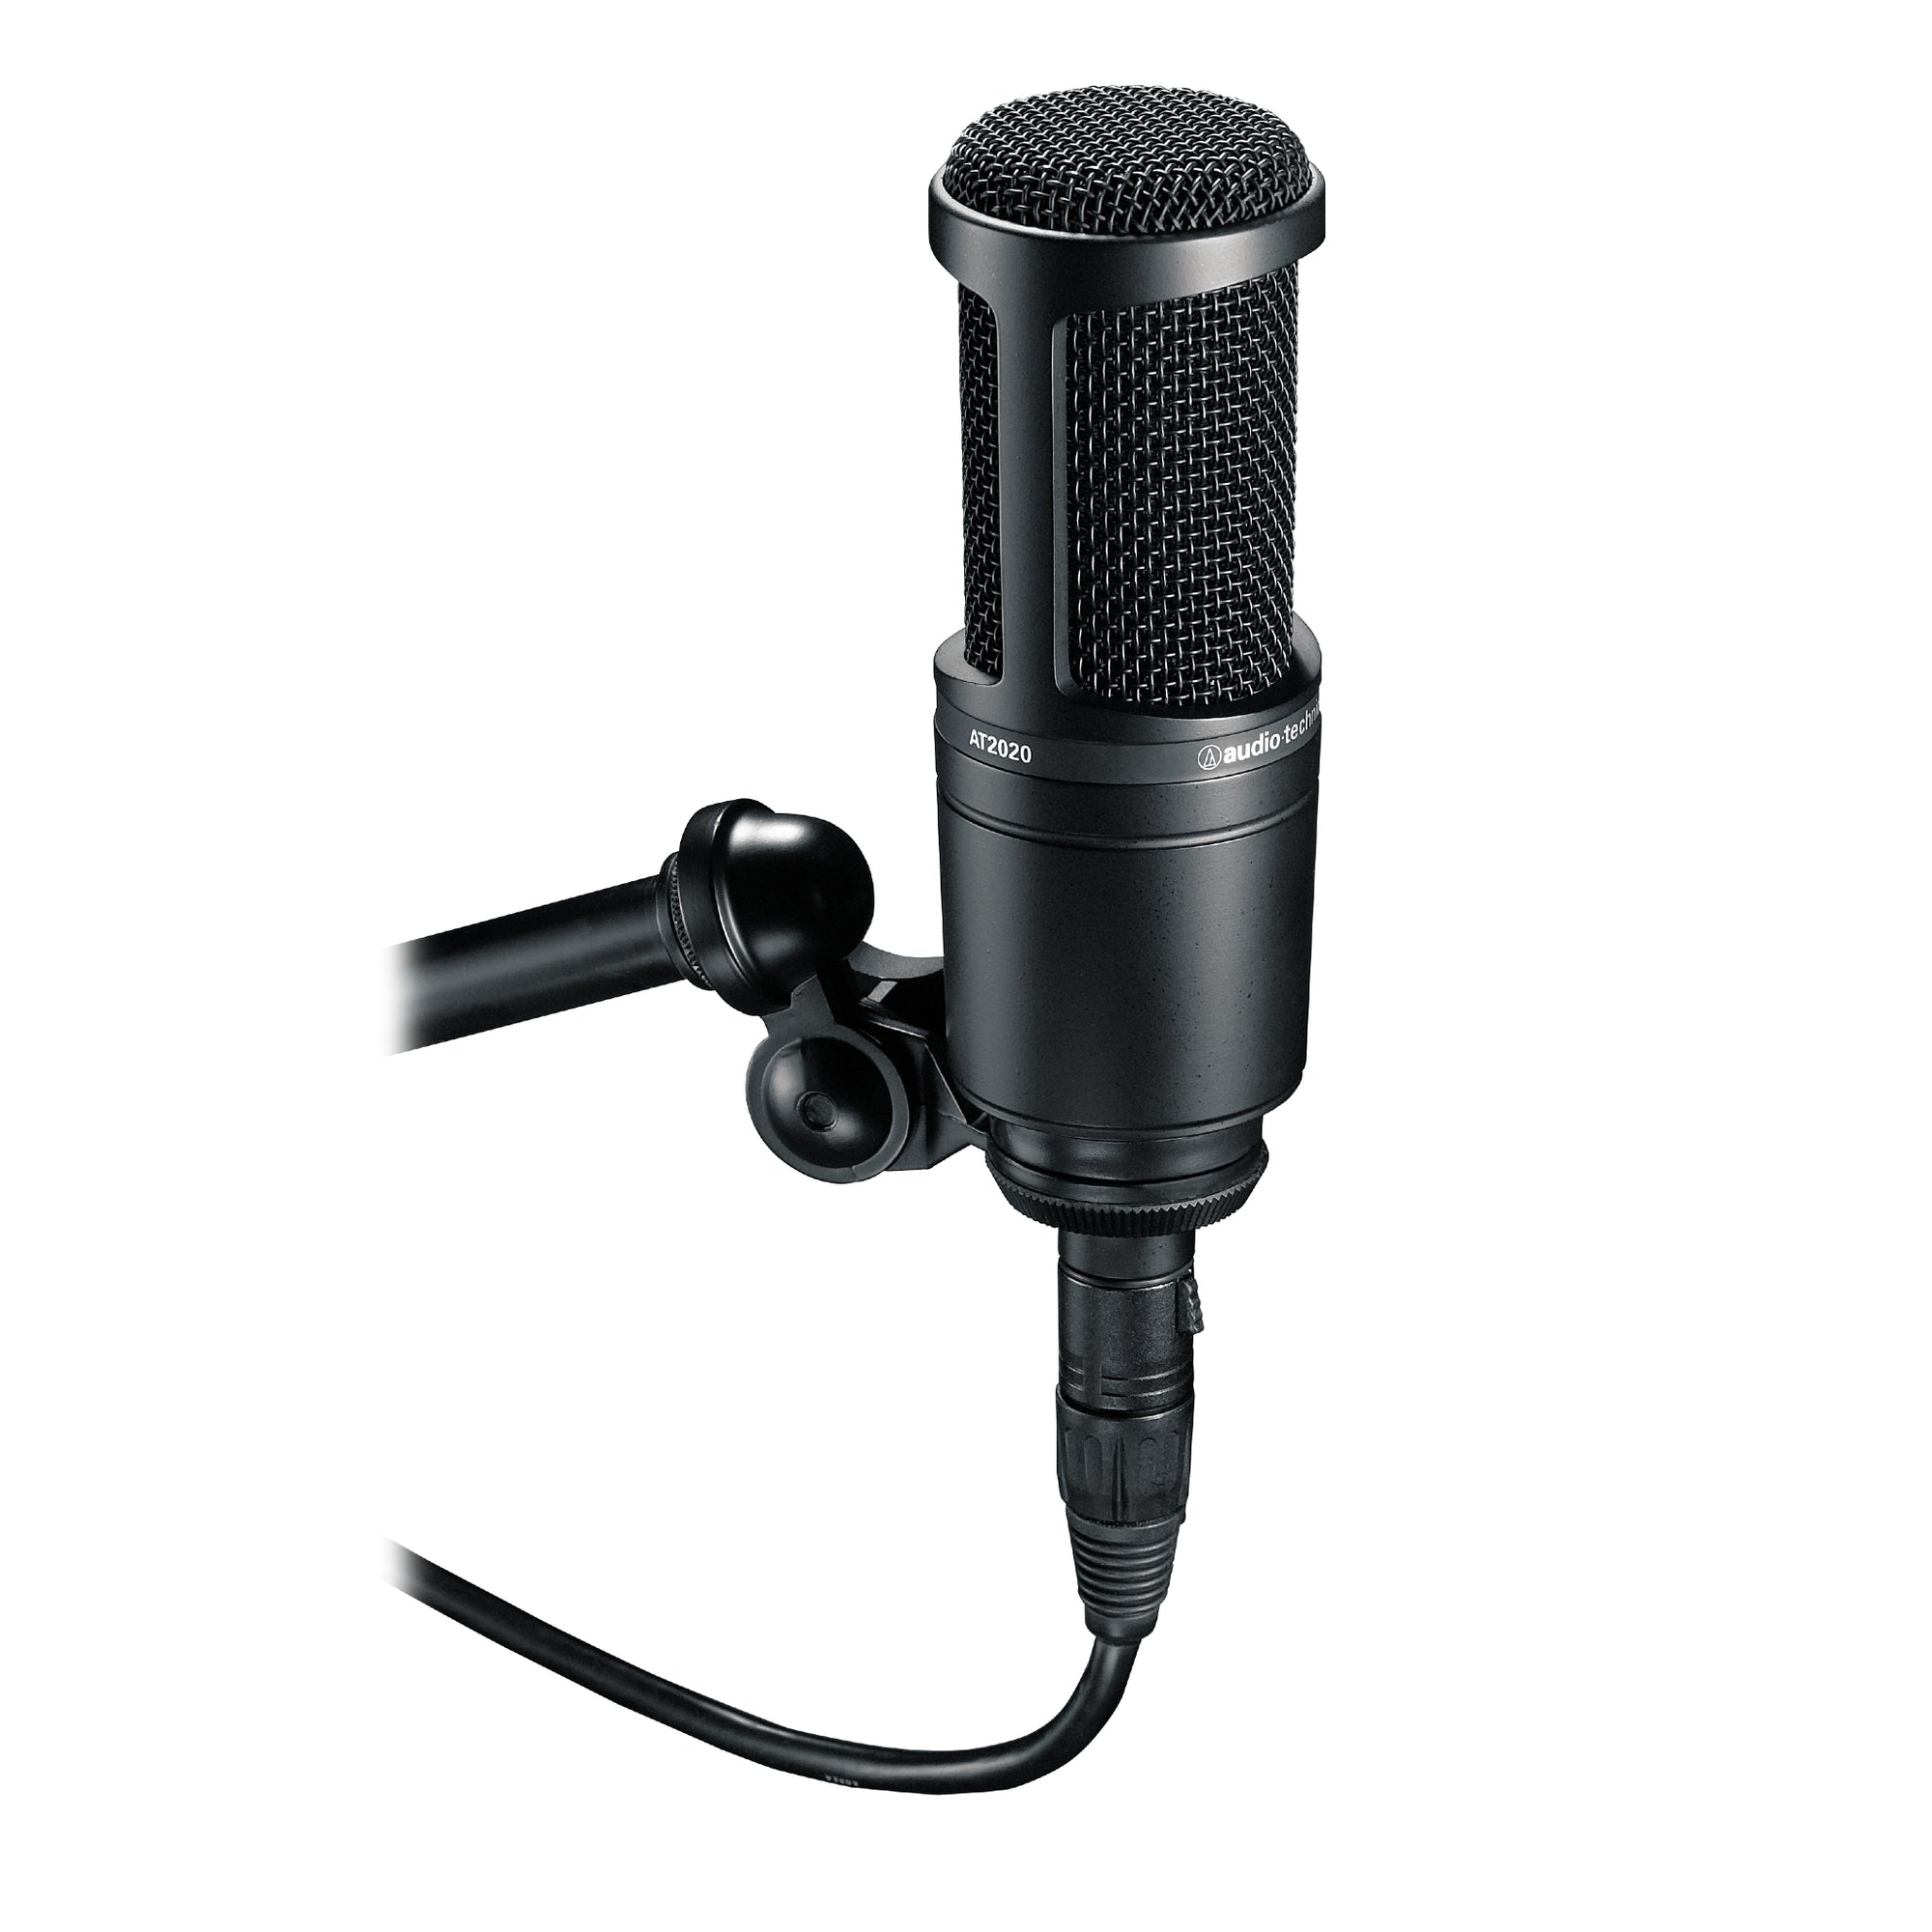 Wired Microphones